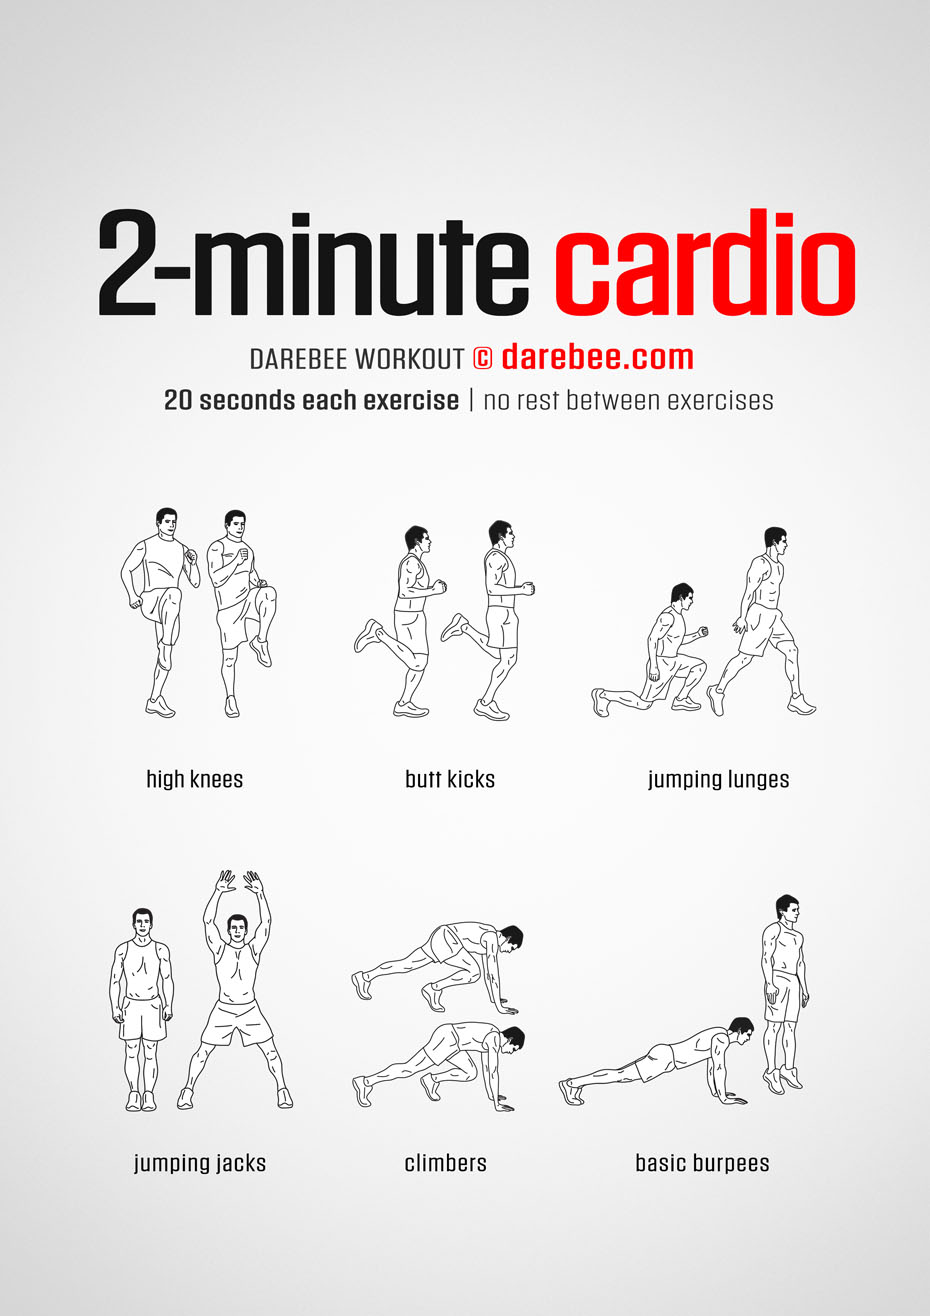 daily cardio workout for men